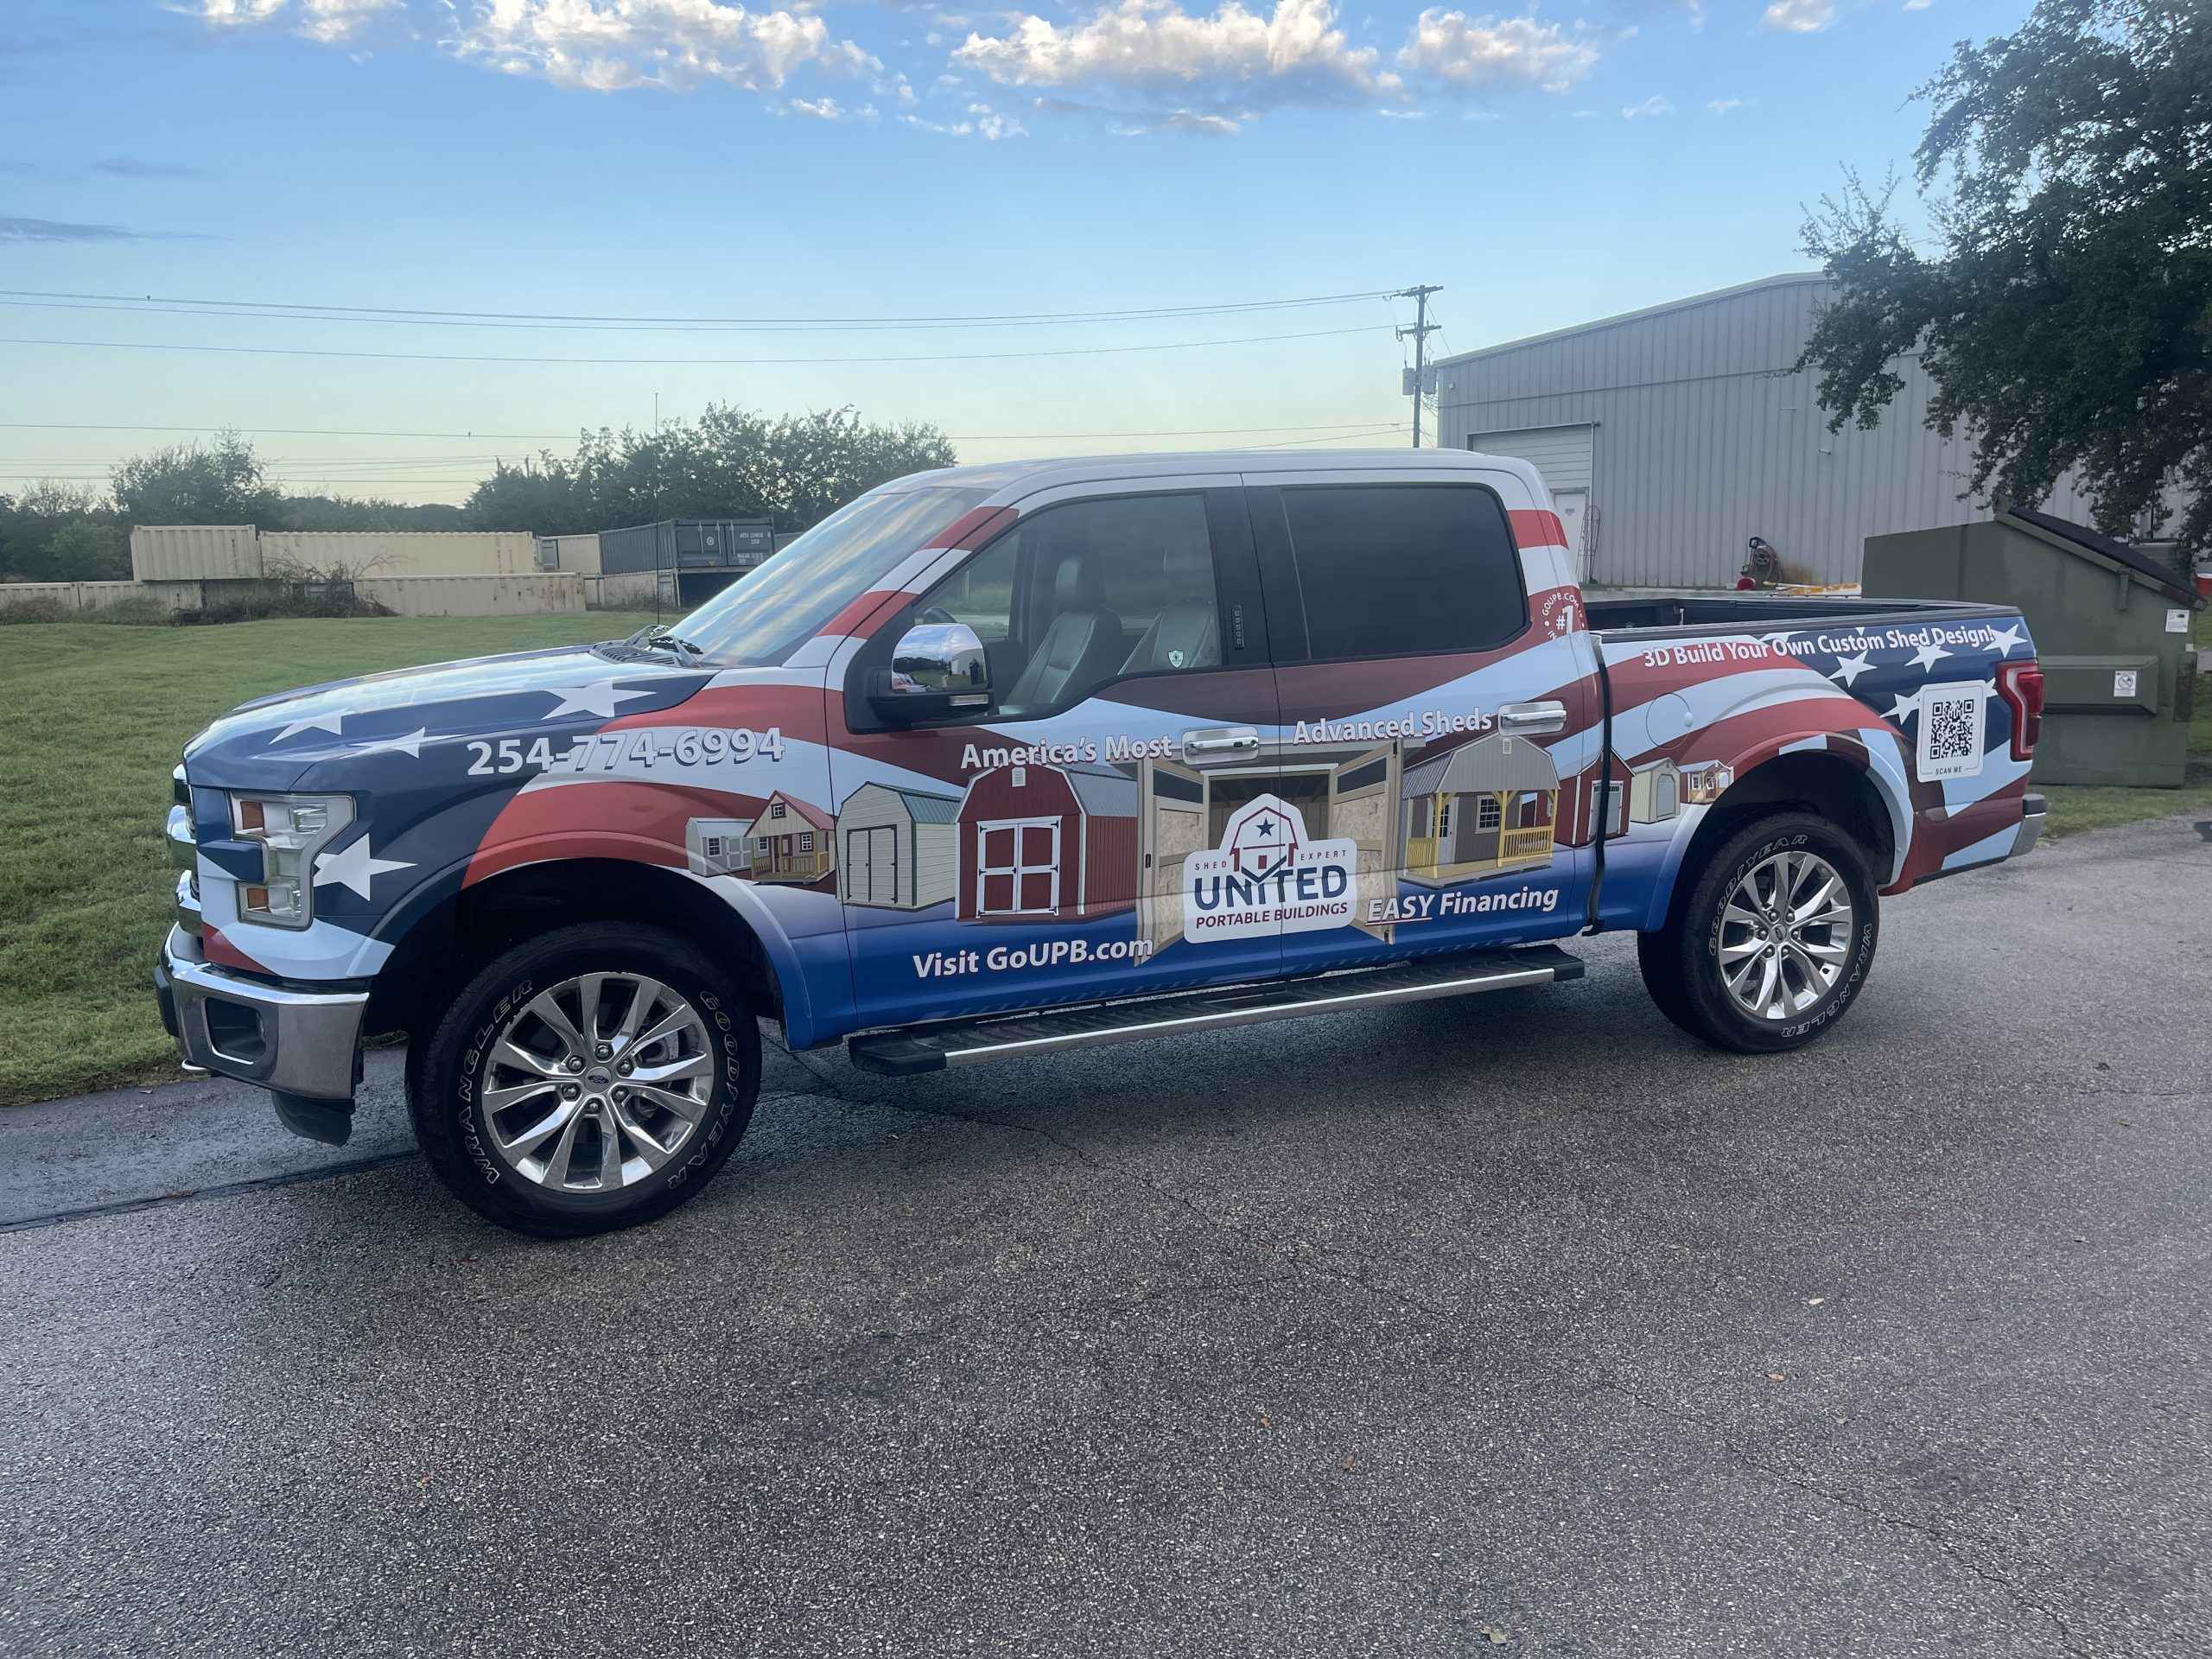 Custom Vehicle Wraps Made by Georgetown Sign Company in Austin, TX